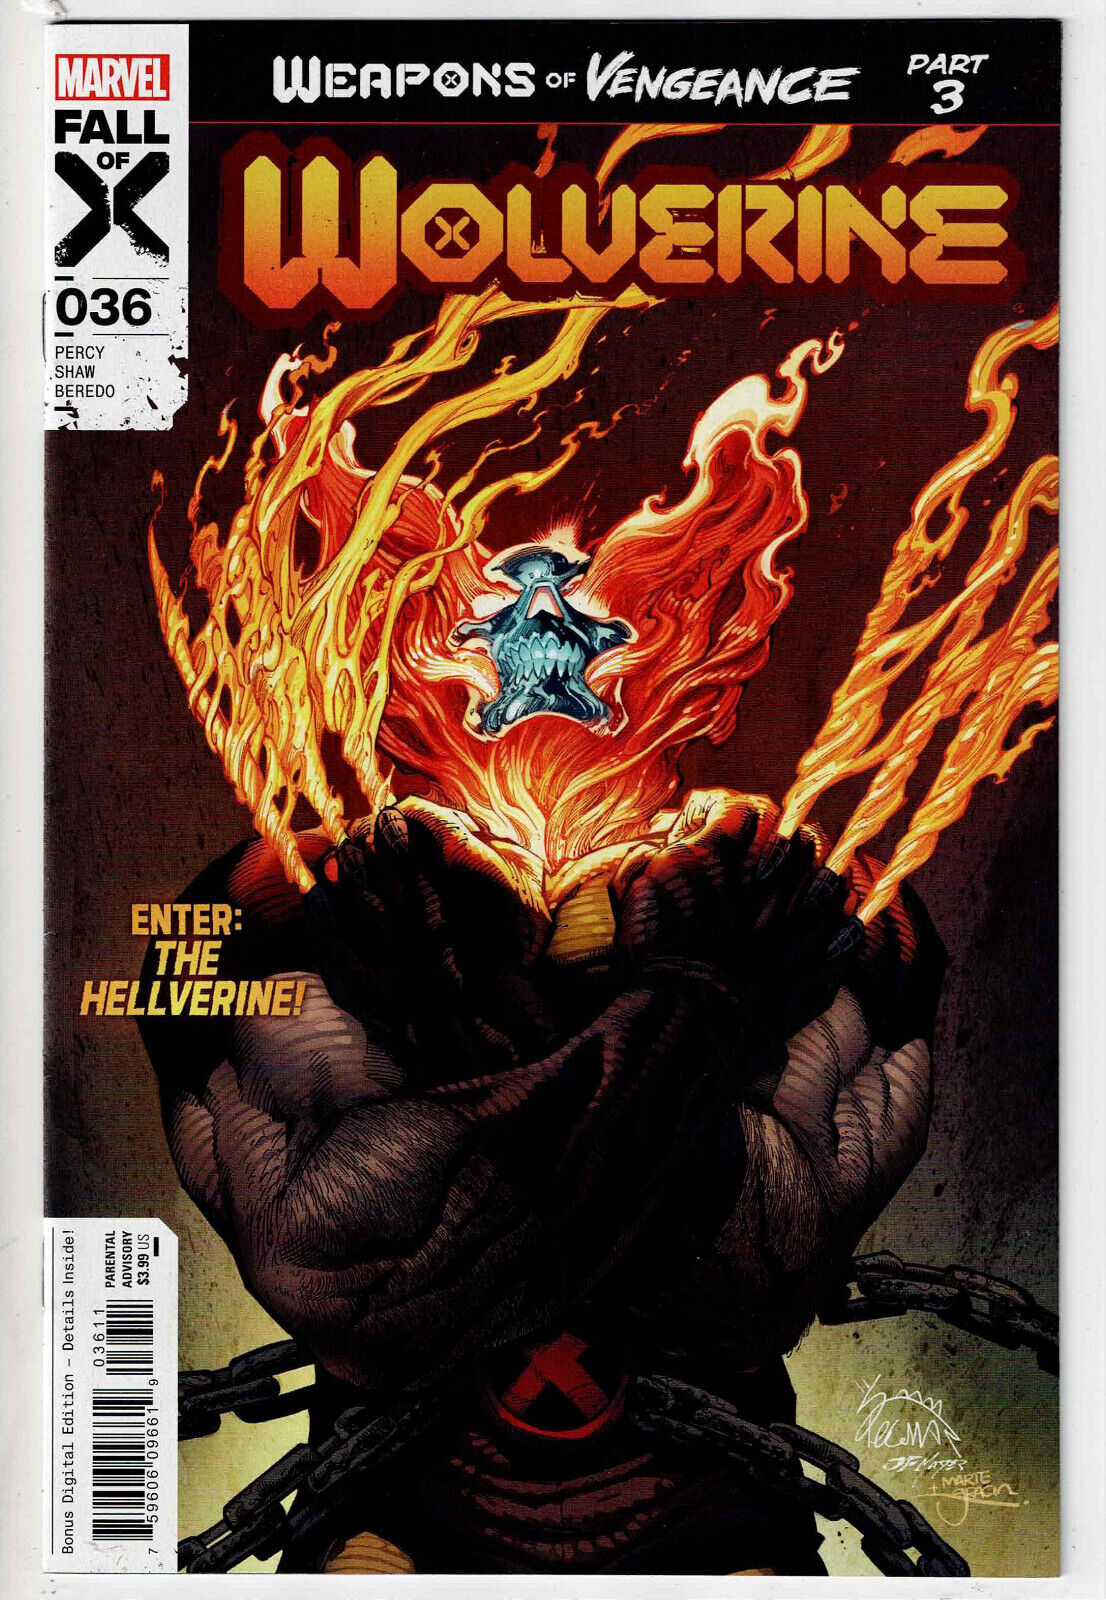 WOLVERINE #36 (2023) ~NM+🔑1ST PRINT 1st appearance of the Hellverine HOT BOOK🔥